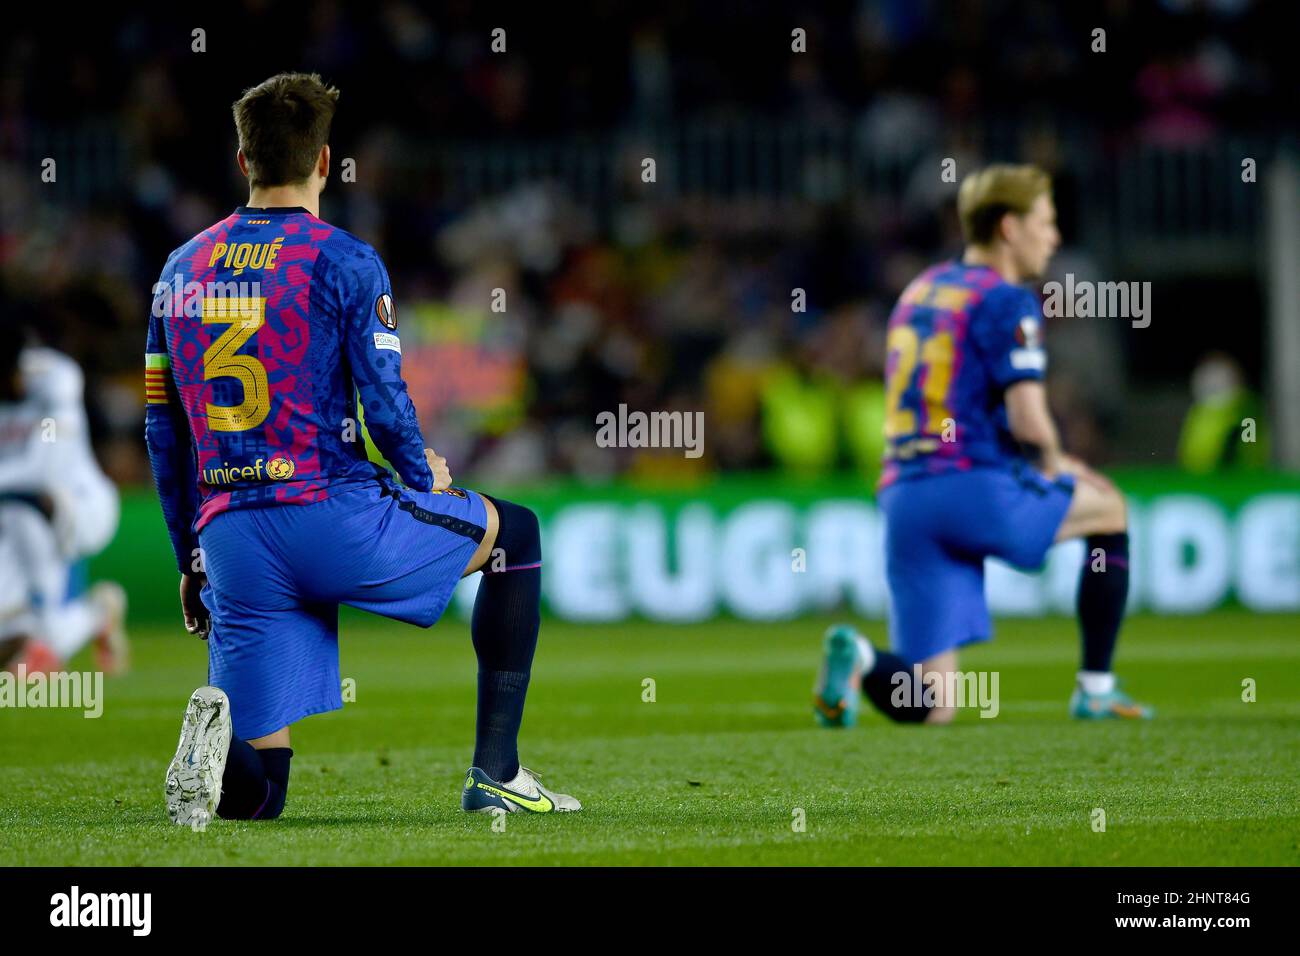 Barcelona,Spain.17 February,2022.  Gerard Pique (3) of FC Barcelona and Frenkie de Jong (21) of FC Barcelona during the Europa League match between FC Barcelona and SSC Napoli at Camp Nou Stadium. Credit: rosdemora/Alamy Live News Stock Photo